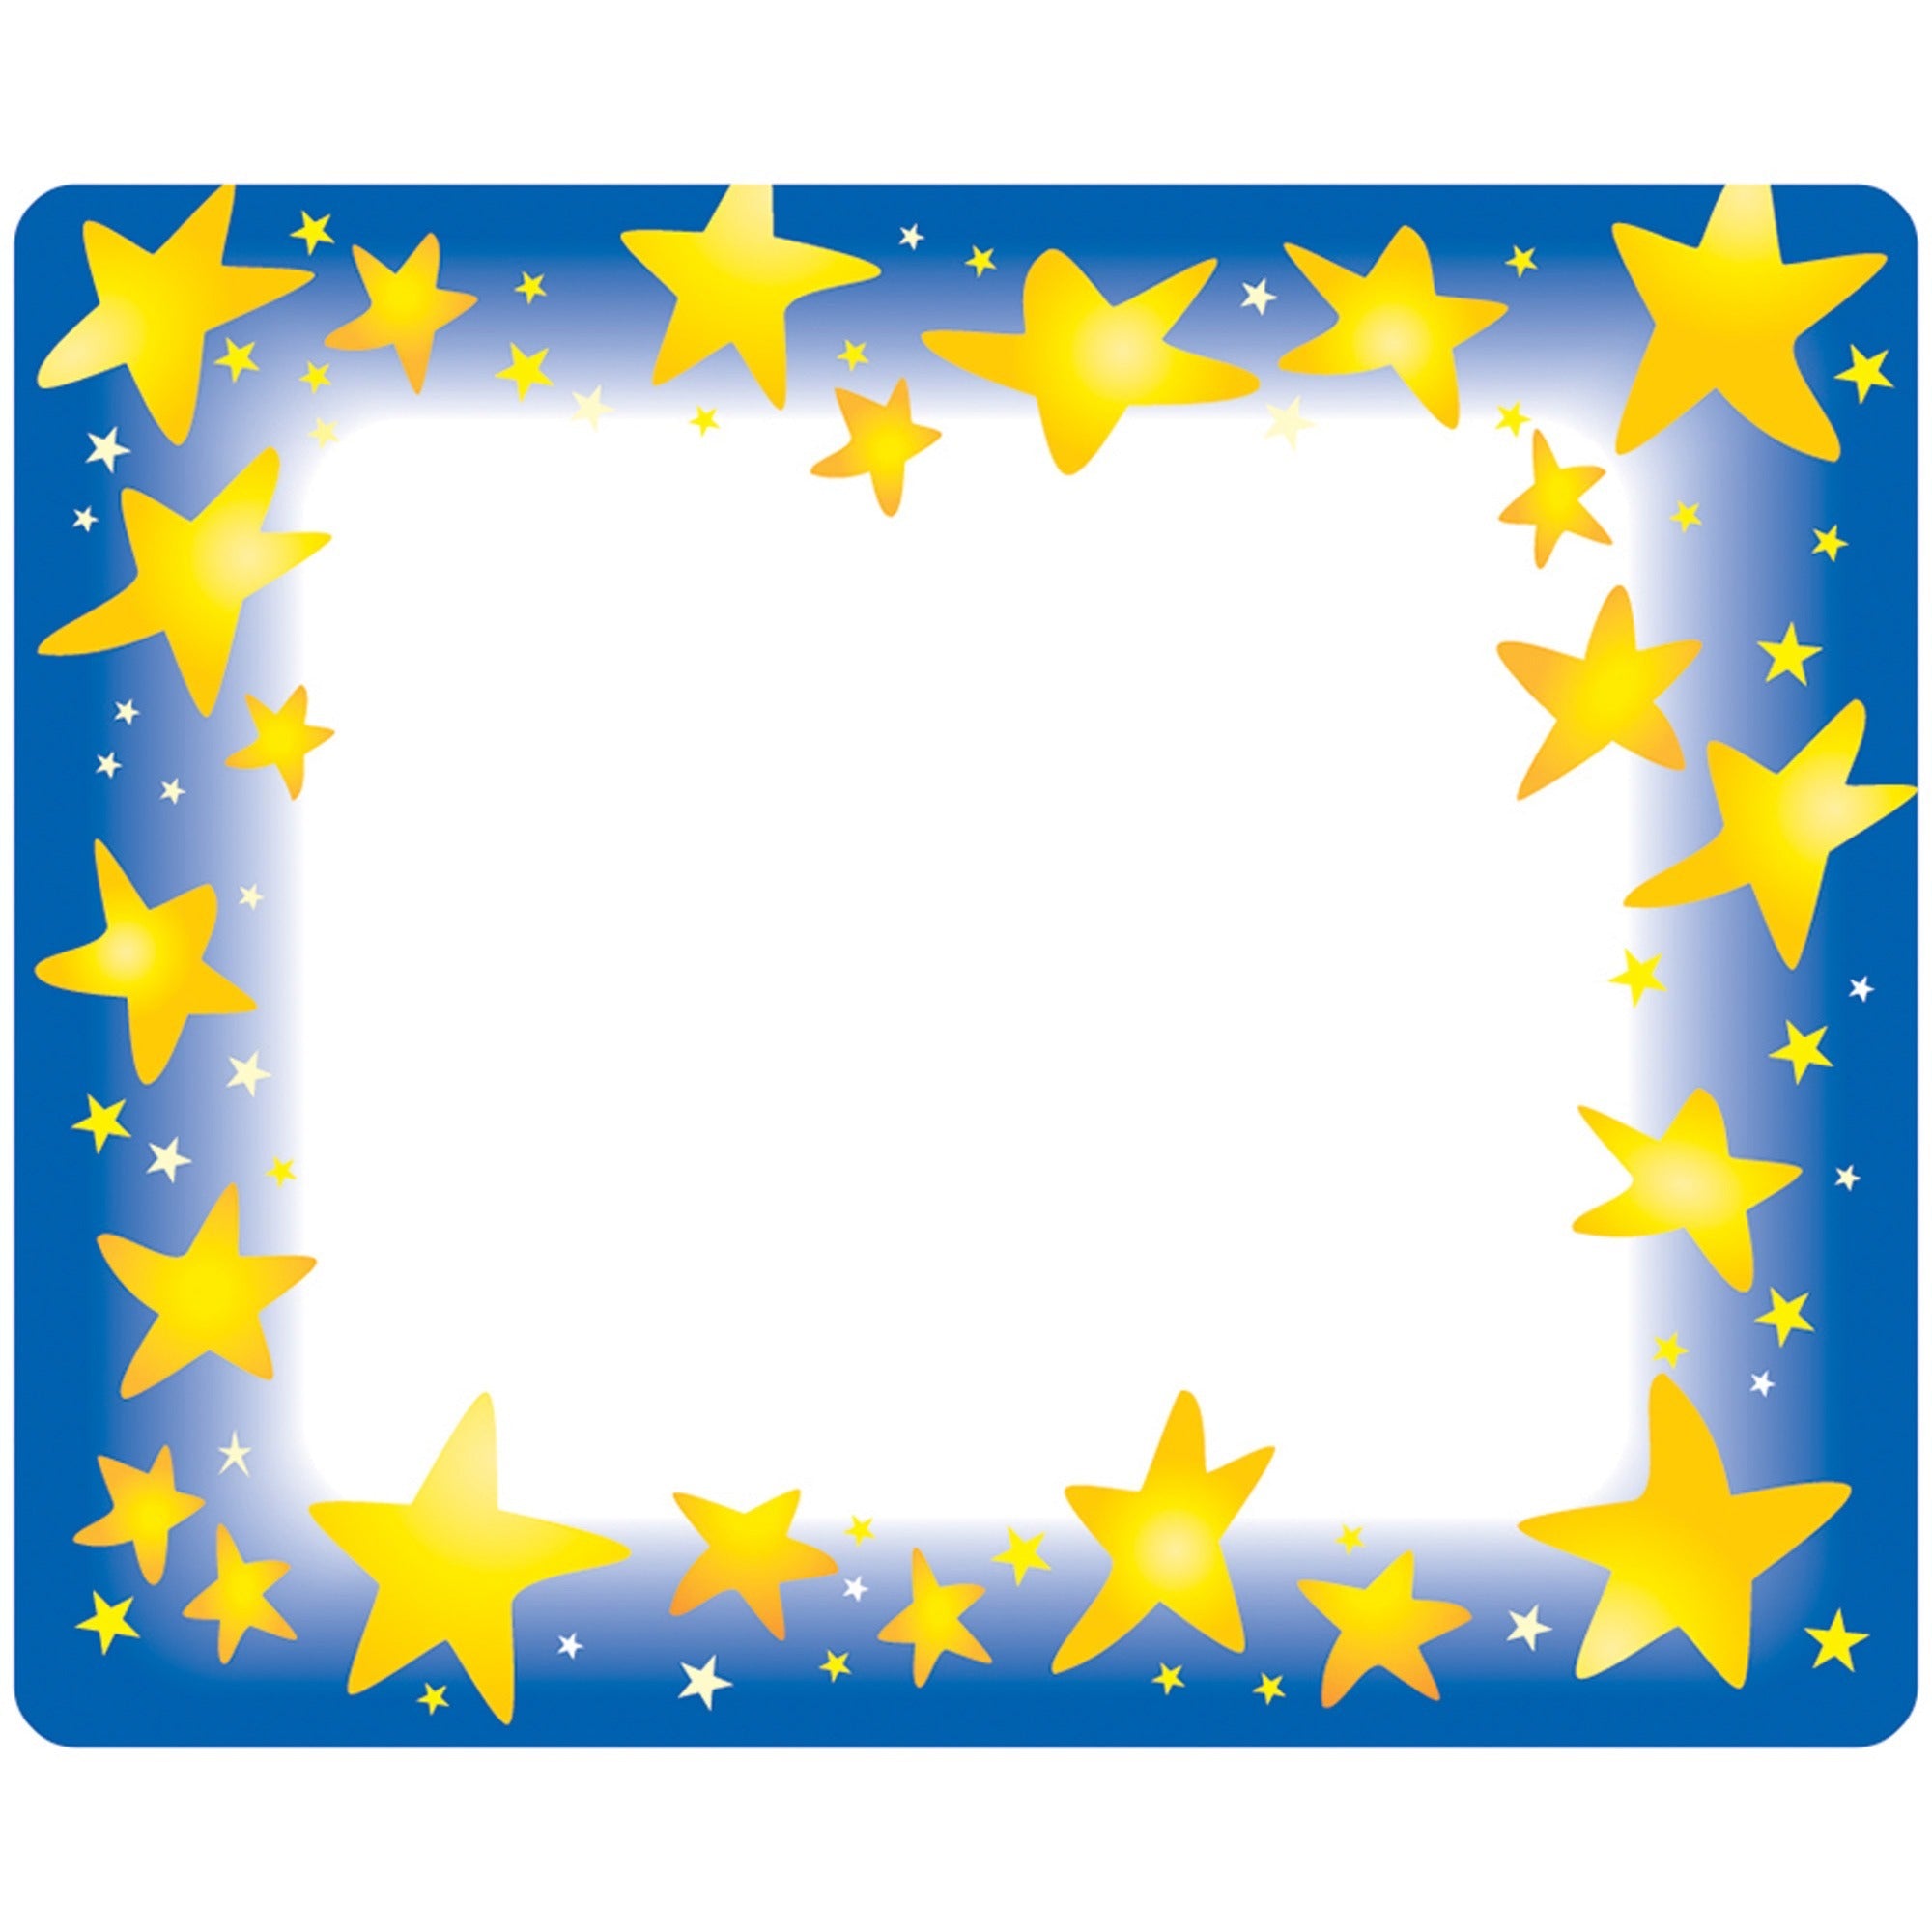 Trend Star Bright Self-adhesive Name Tags - 3" Length x 2.50" Width - Rectangular - 36 / Pack - Assorted - 